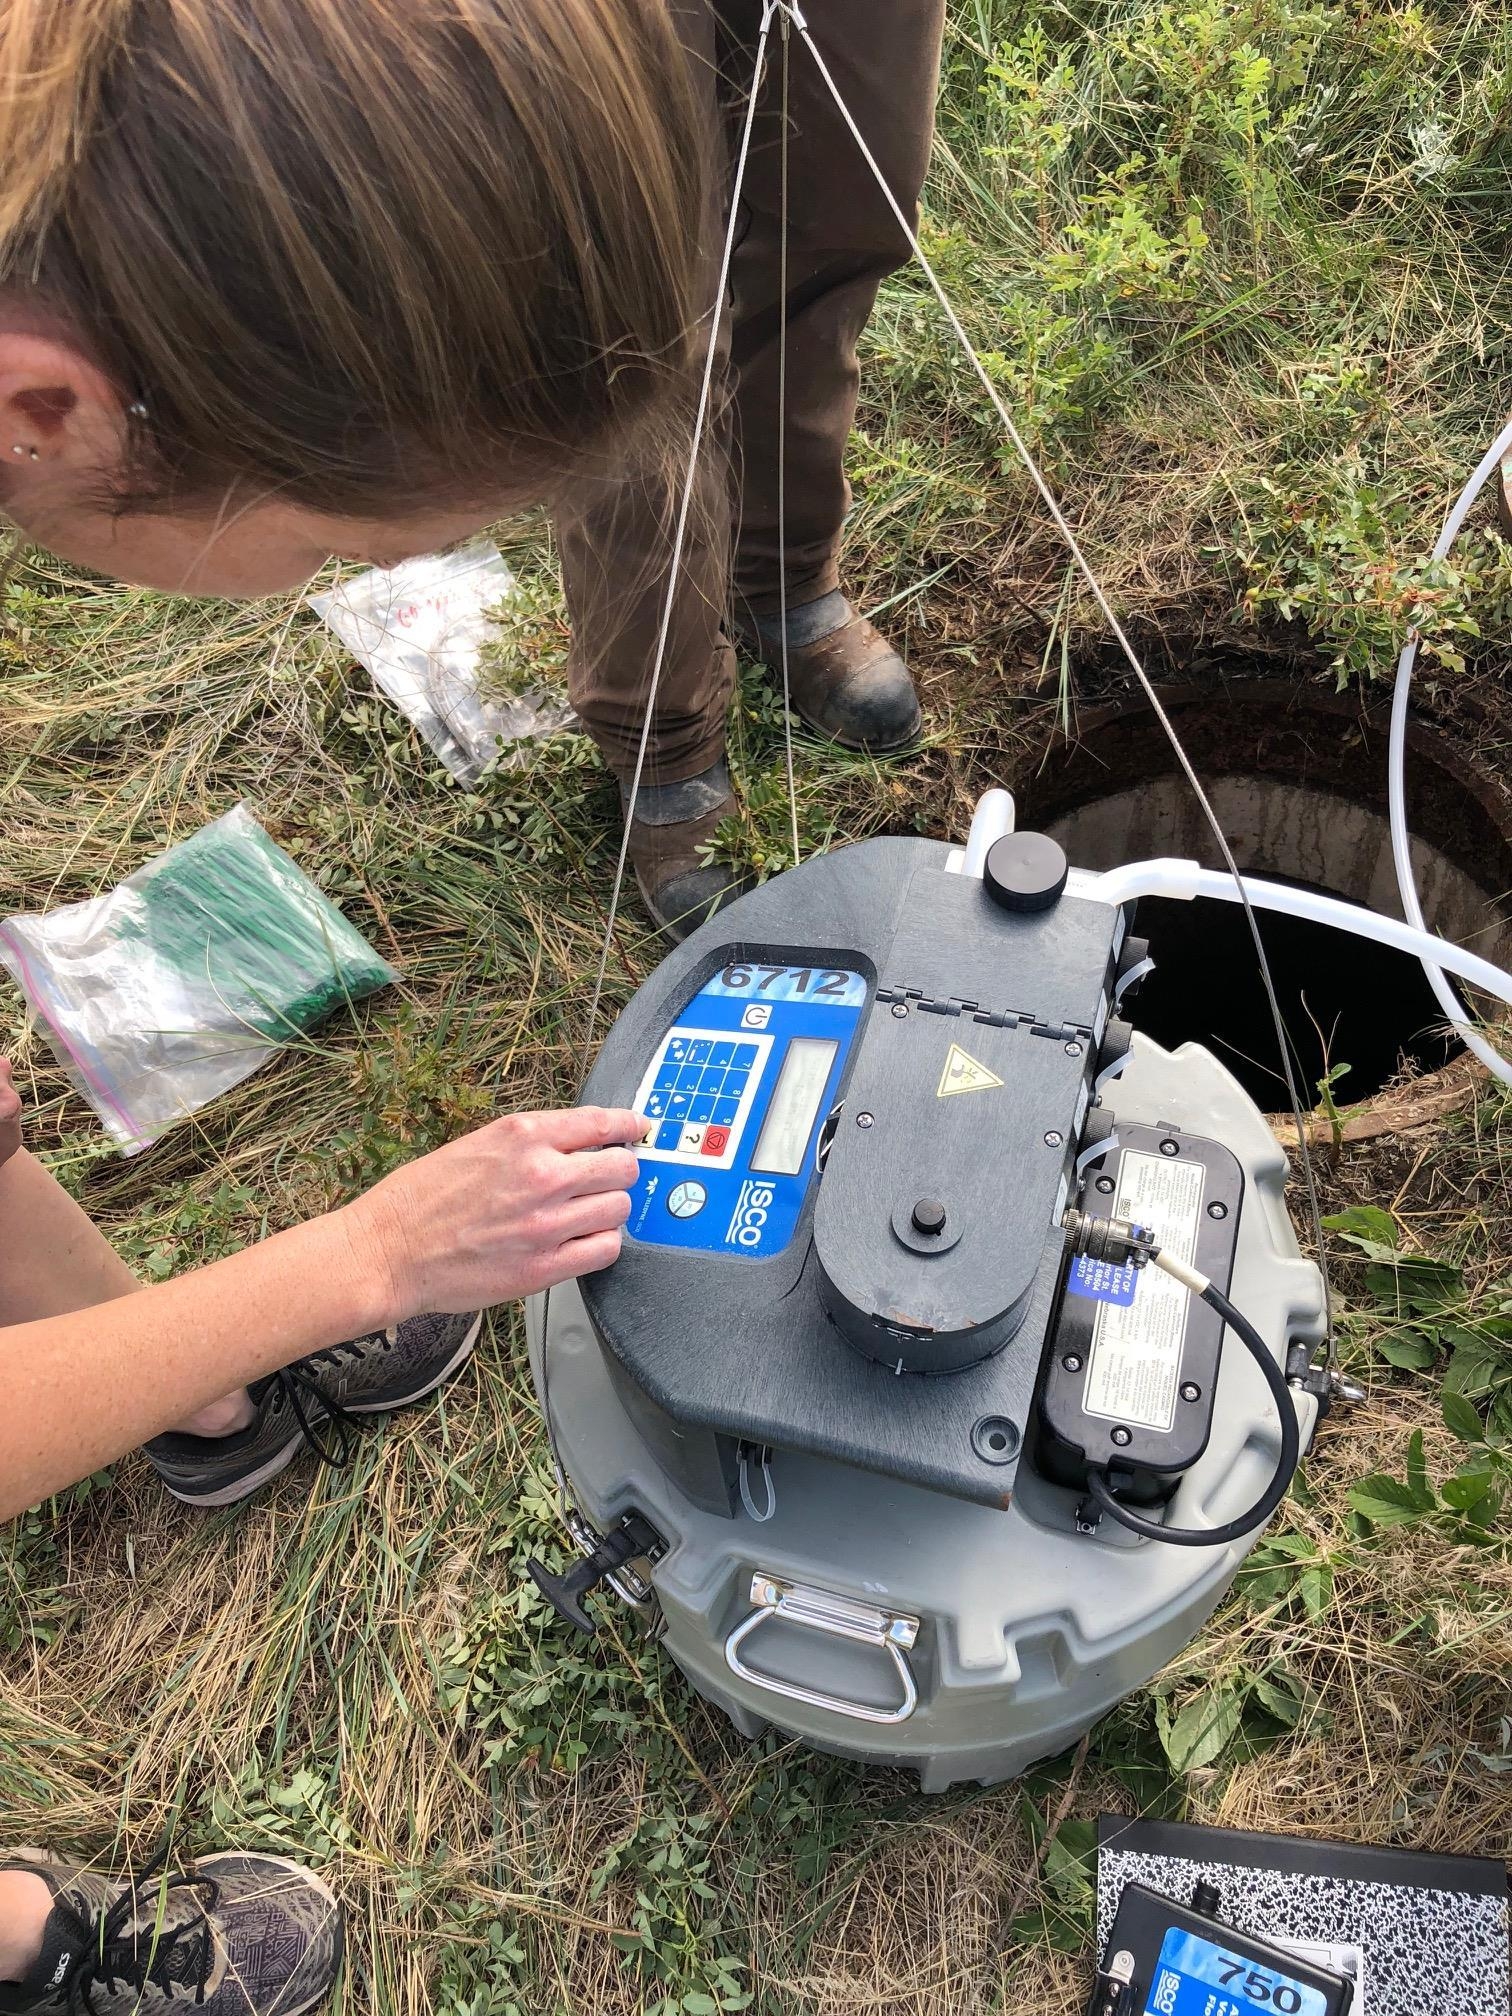 ASU researcher Erin Driver adjusts automated wastewater sampler